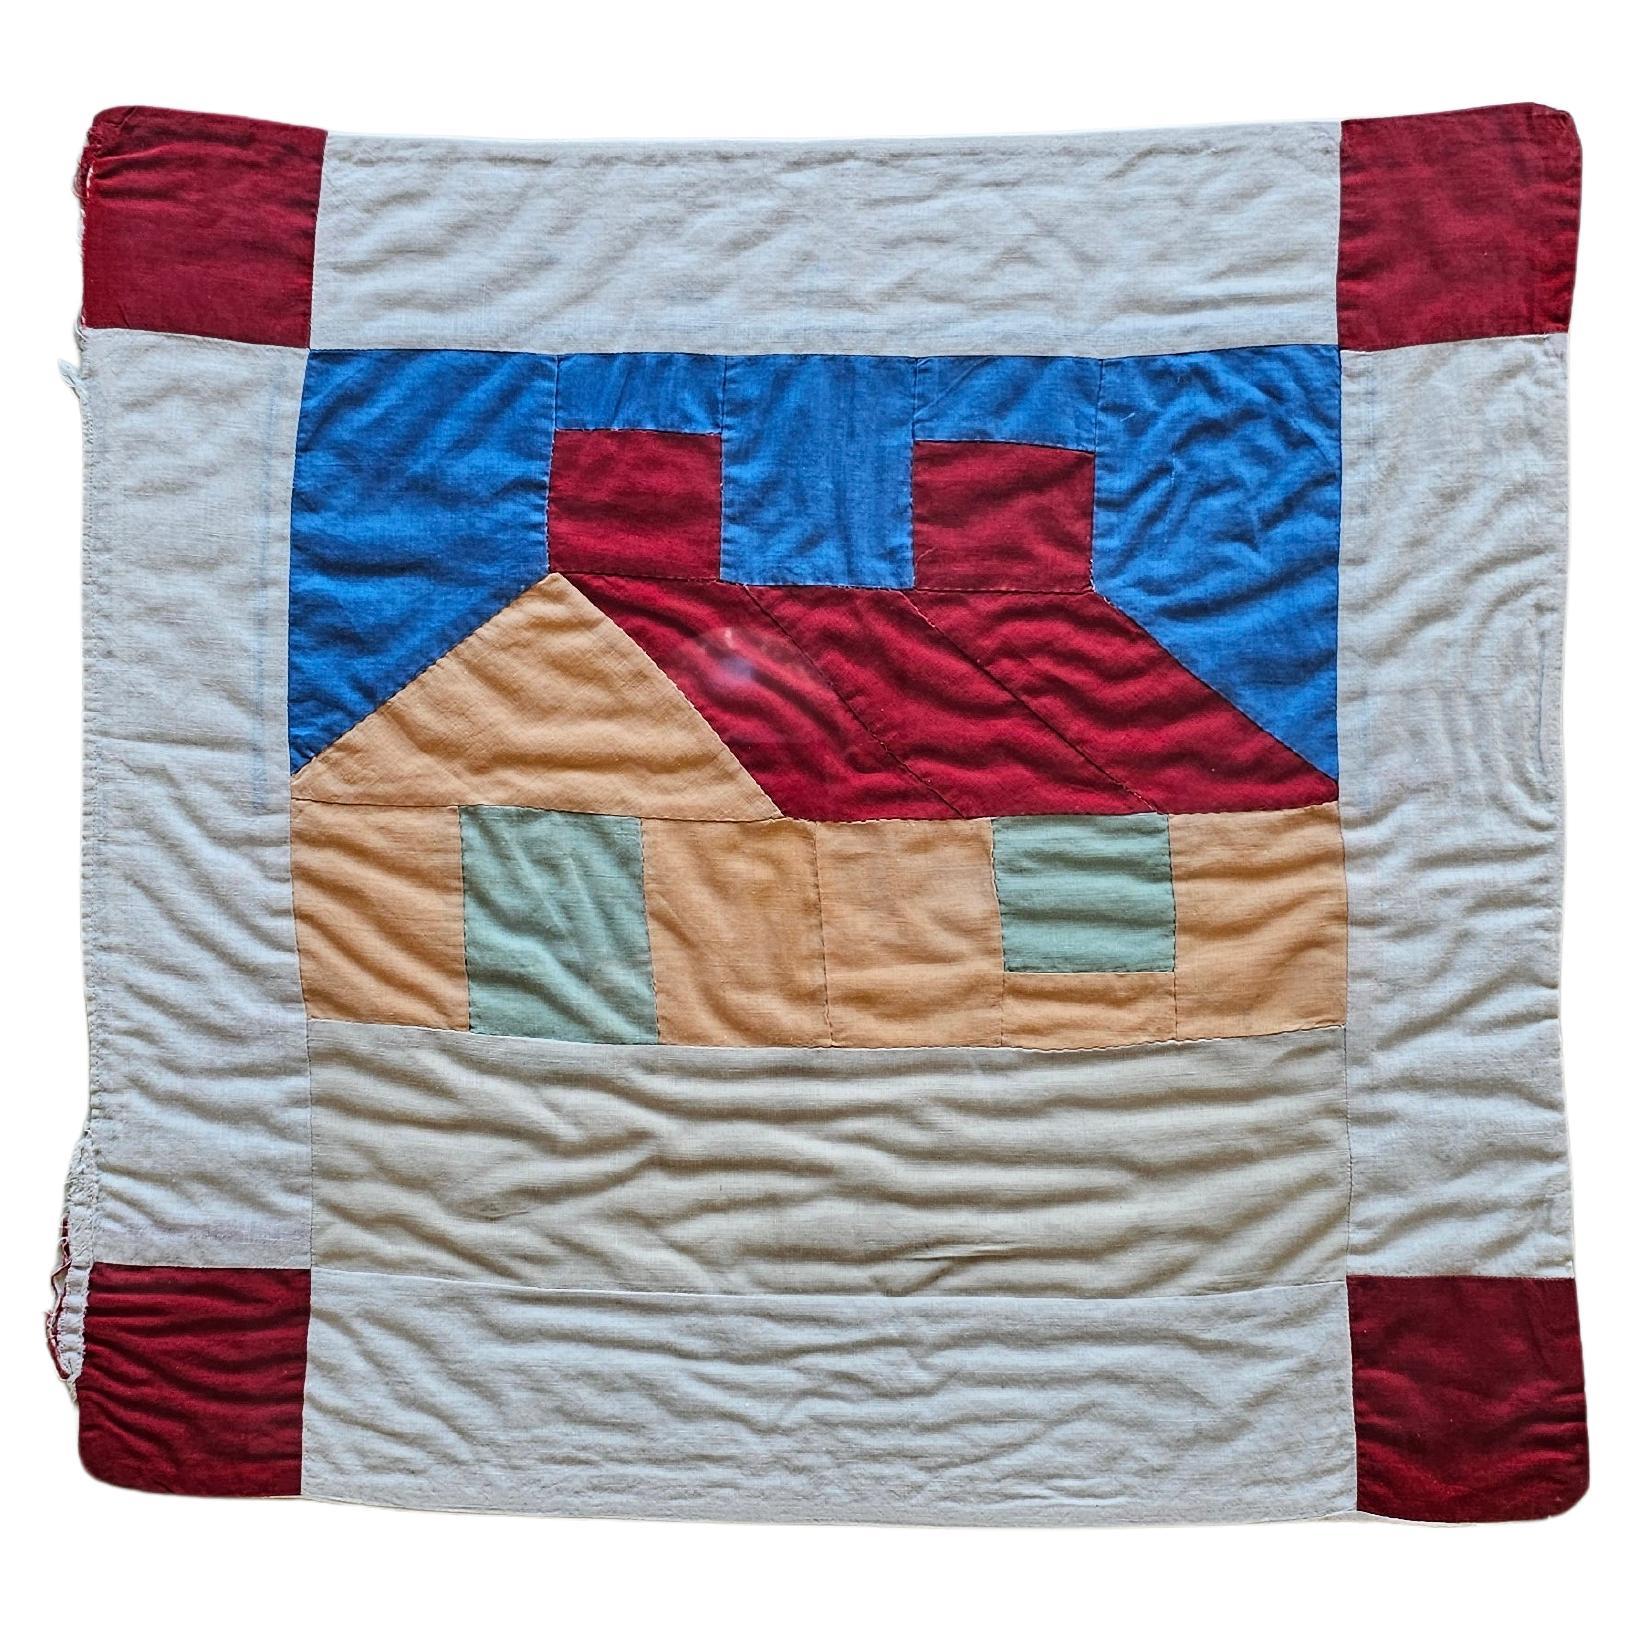 Vintage Hand Stitched Crib Quilt in Red, Green, Peach, Blue Framed as Wall Art